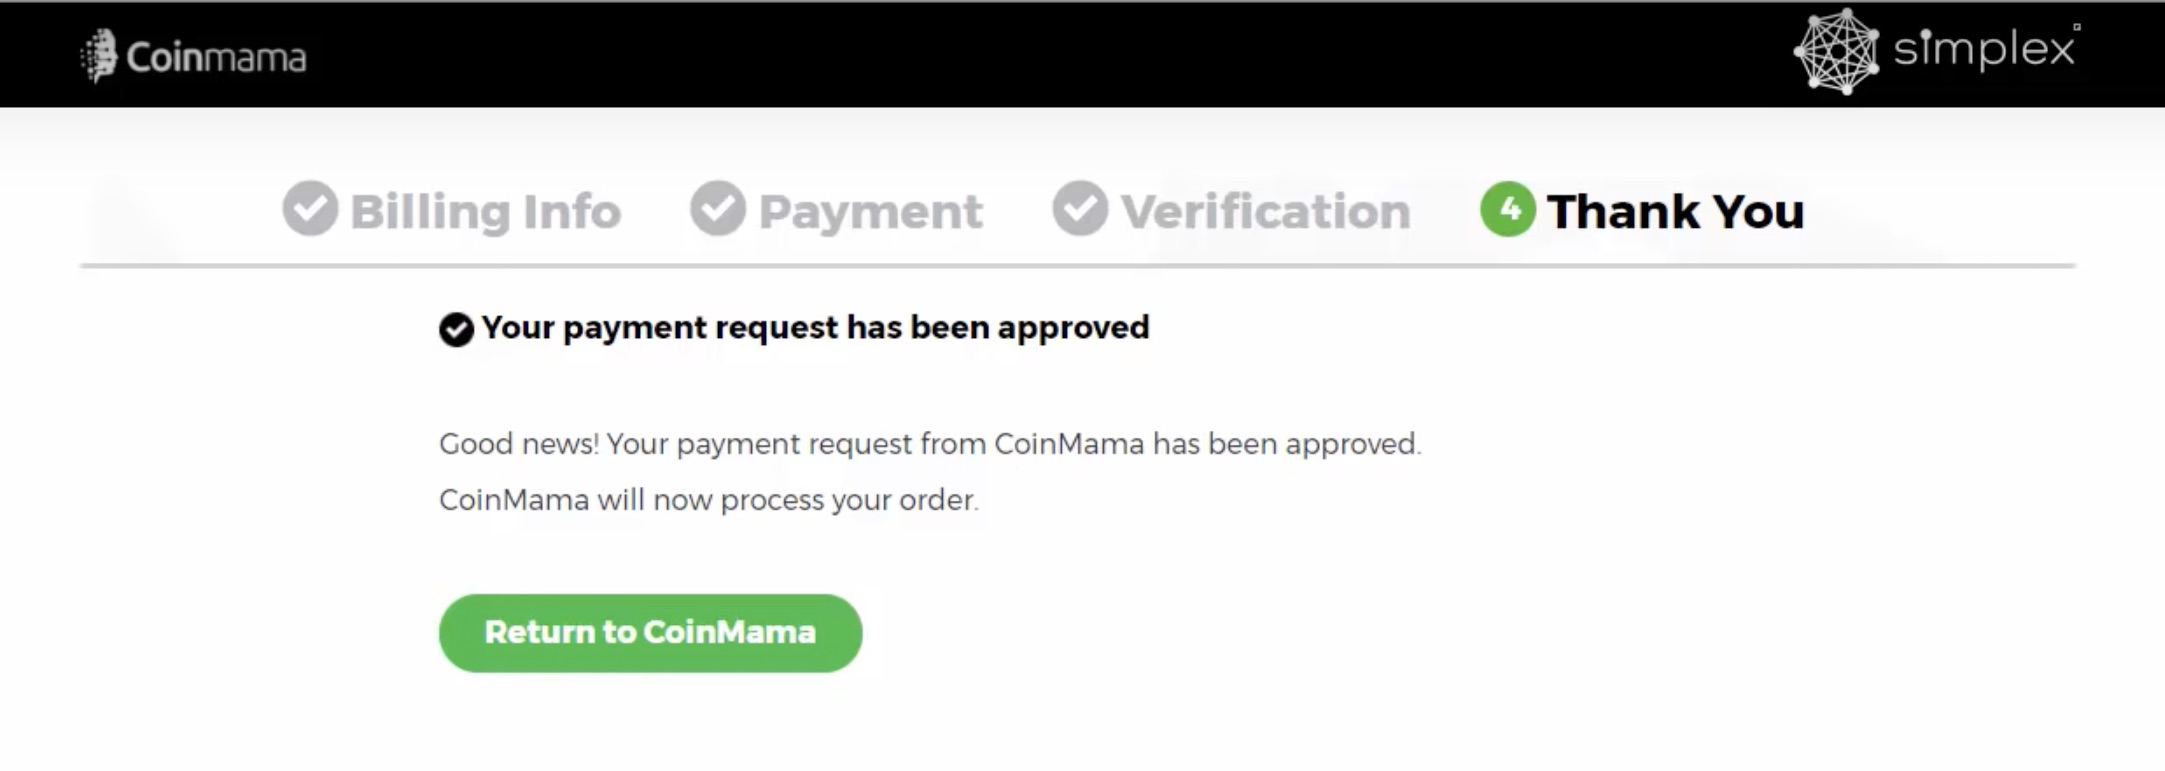 How to buy bitcoin with debit card on coinmama